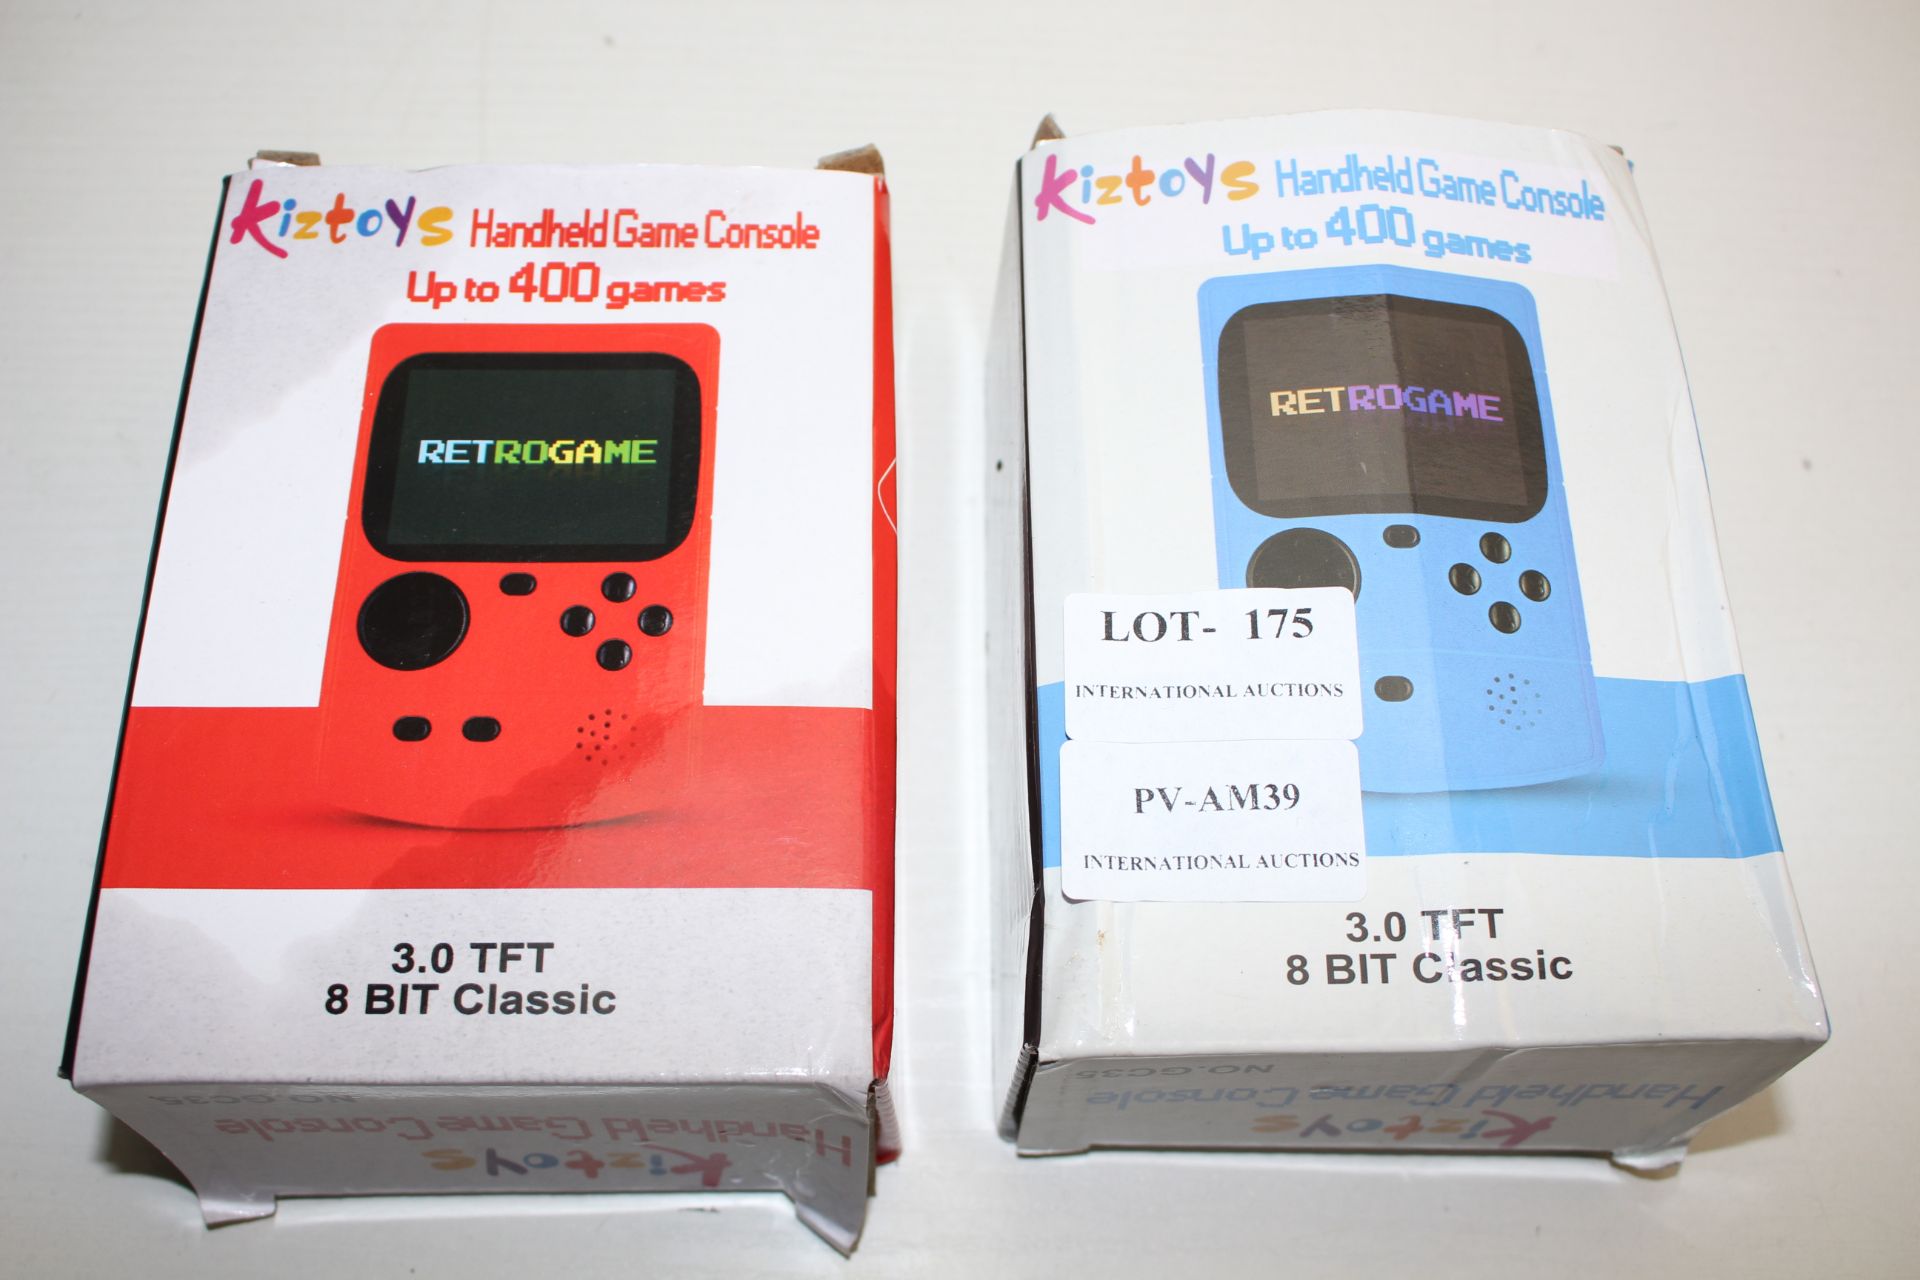 2X BOXED KIZTOYS HANDHELD GAME CONSOLE UPTO 400 GAMES (IMAGE DEPICTS STOCK)Condition ReportAppraisal